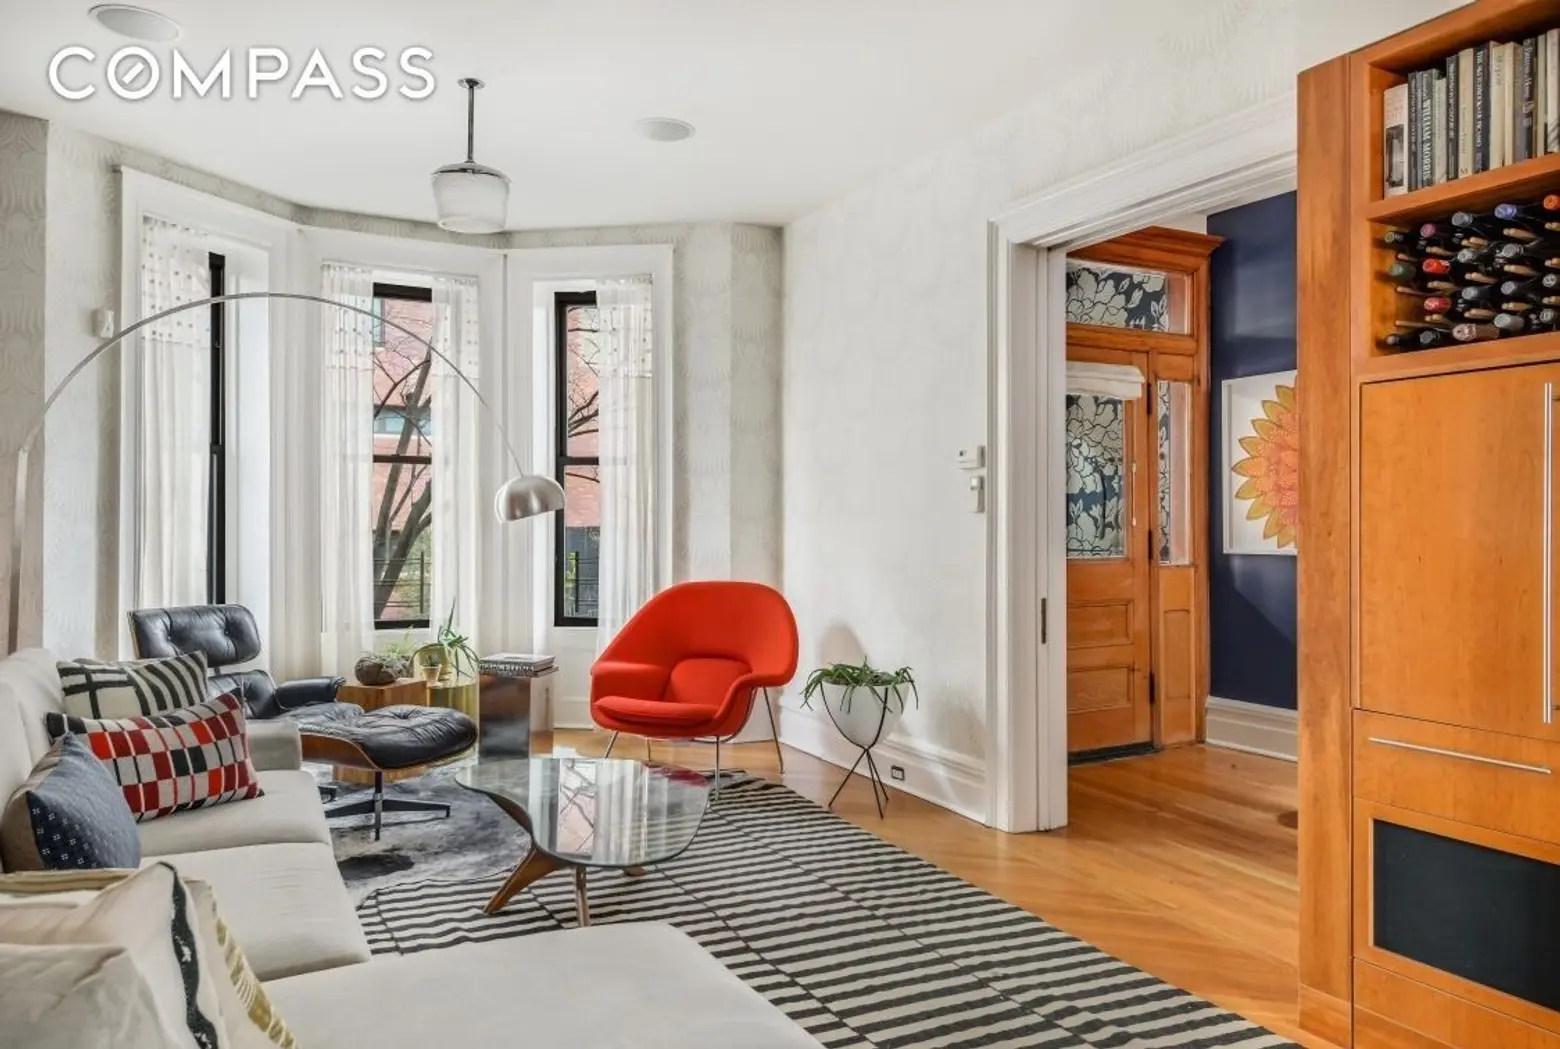 $3M Park Slope townhouse is the ideal mix of historic detail and modern ease